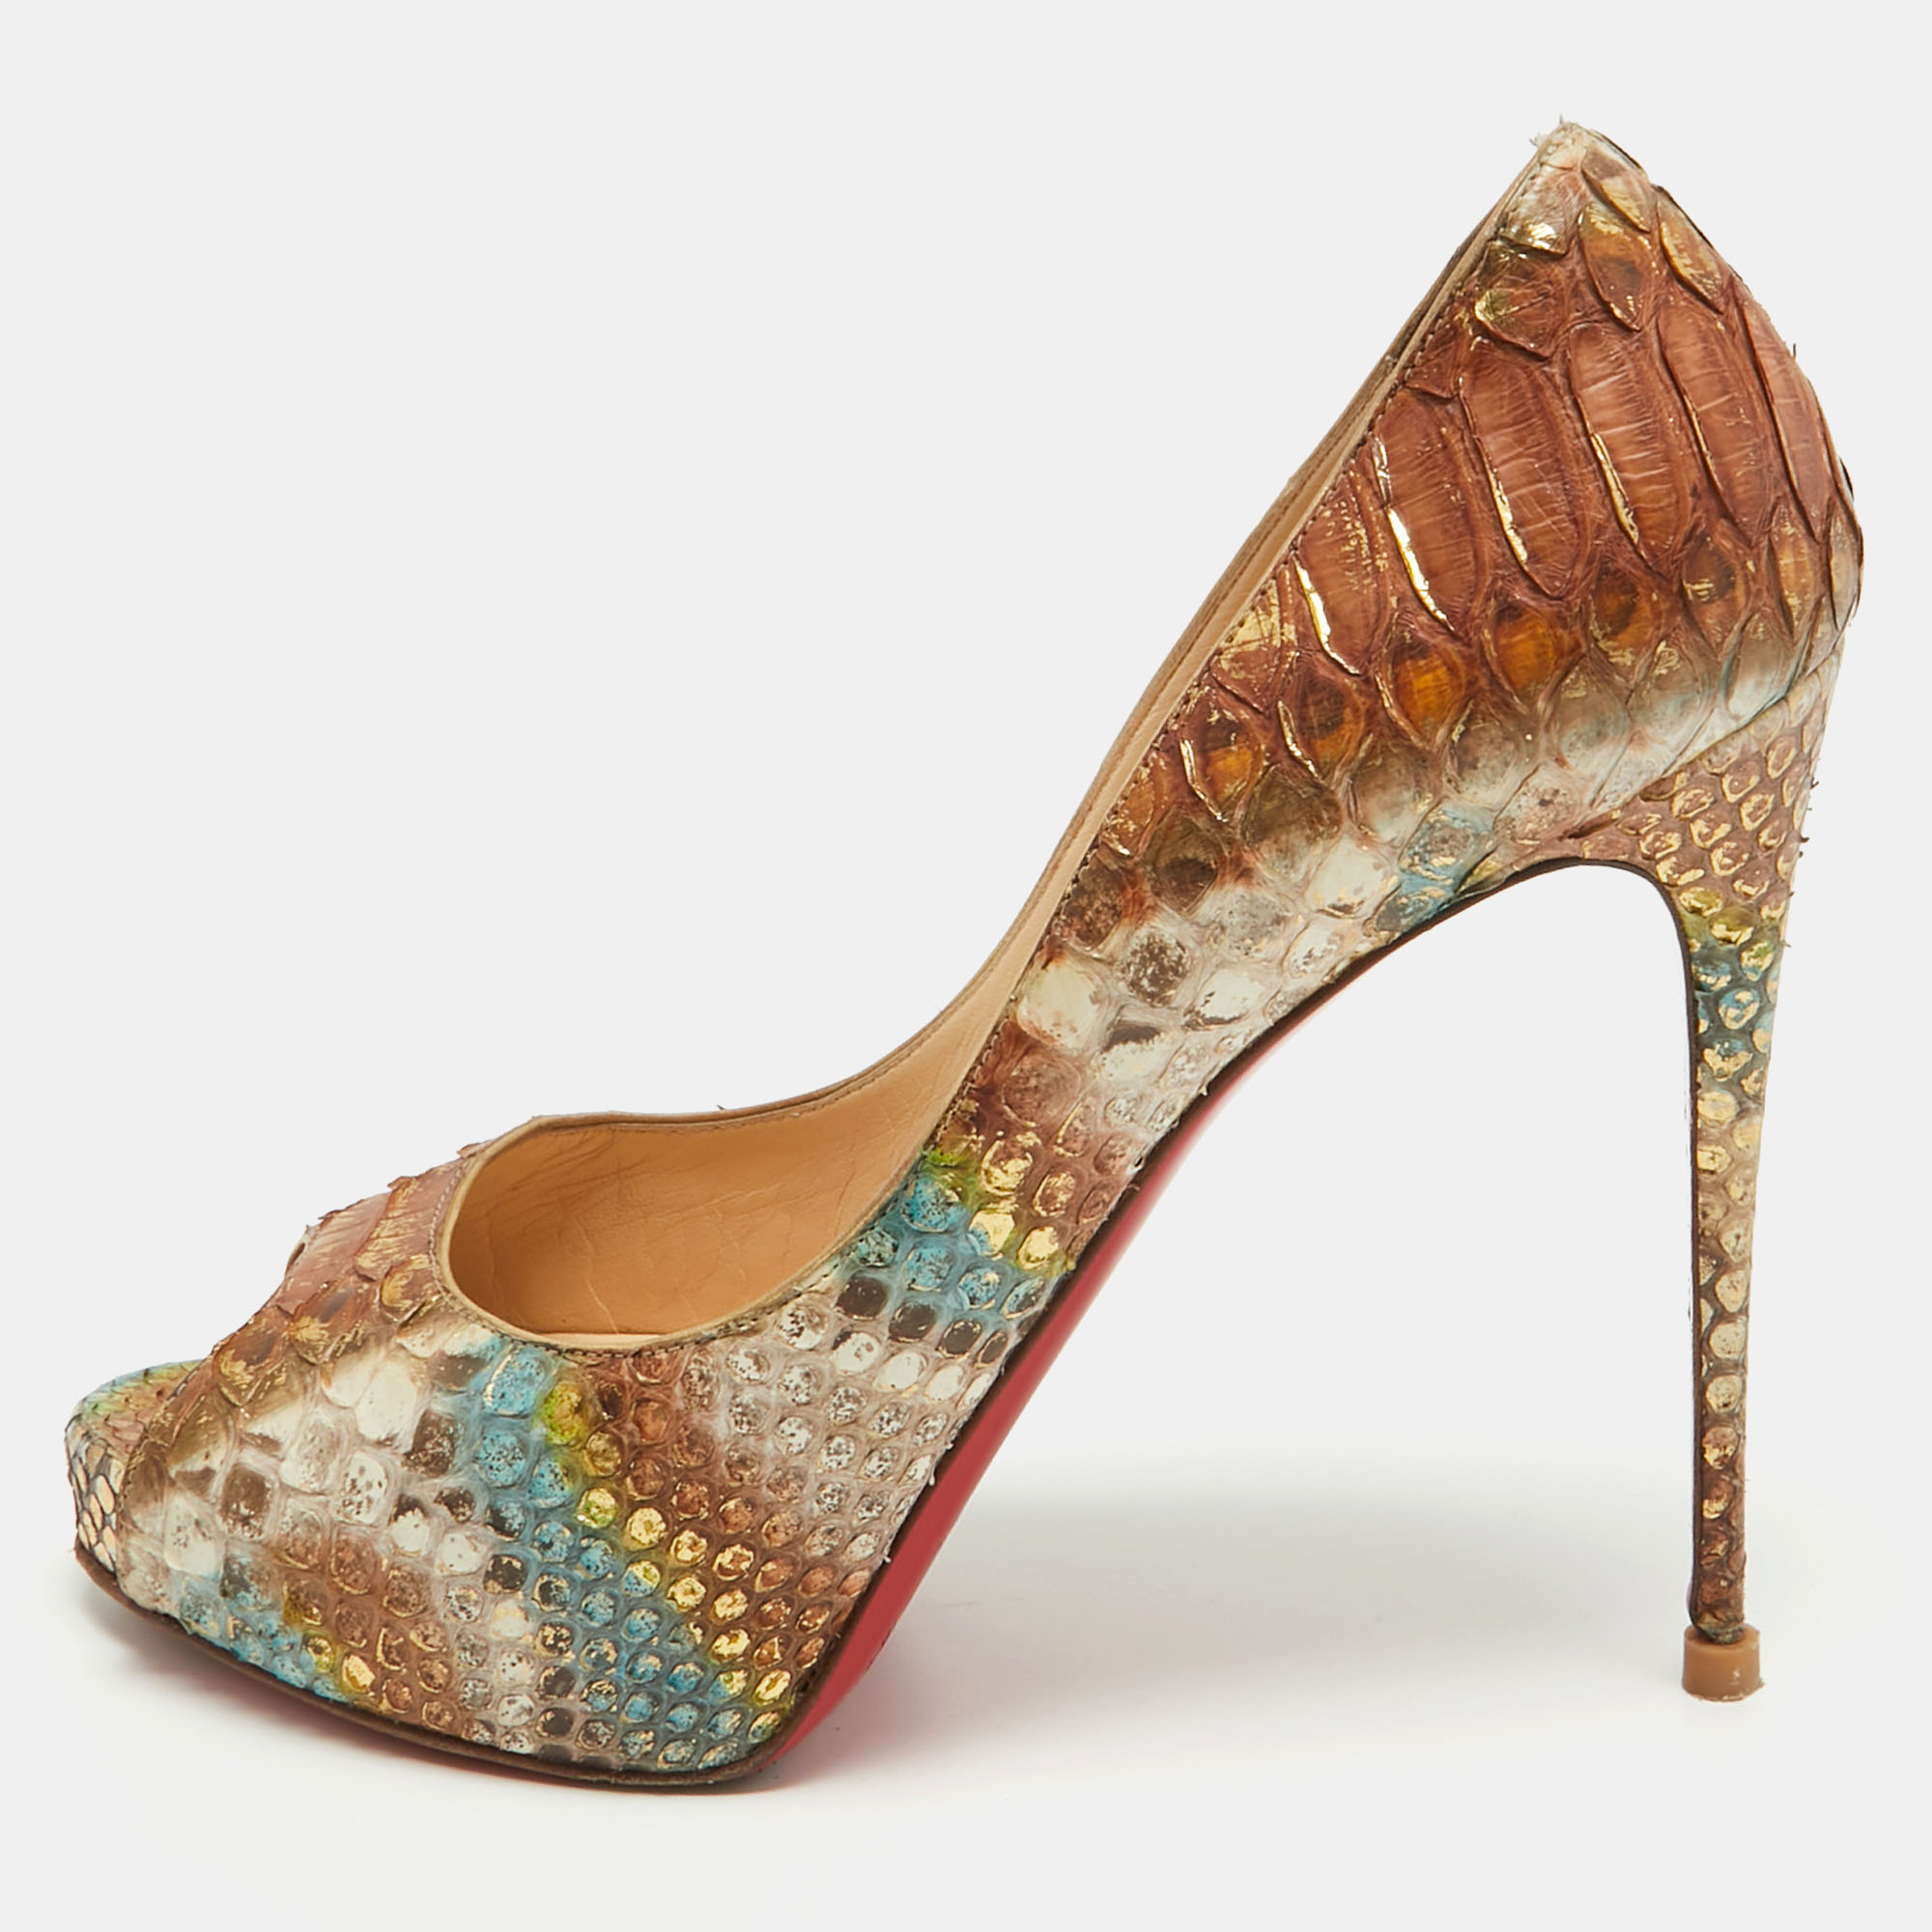 These pumps from Christian Louboutin are meant to be a loved choice. Wonderfully crafted and balanced on sleek heels the pumps will lift your feet in a stunning silhouette.